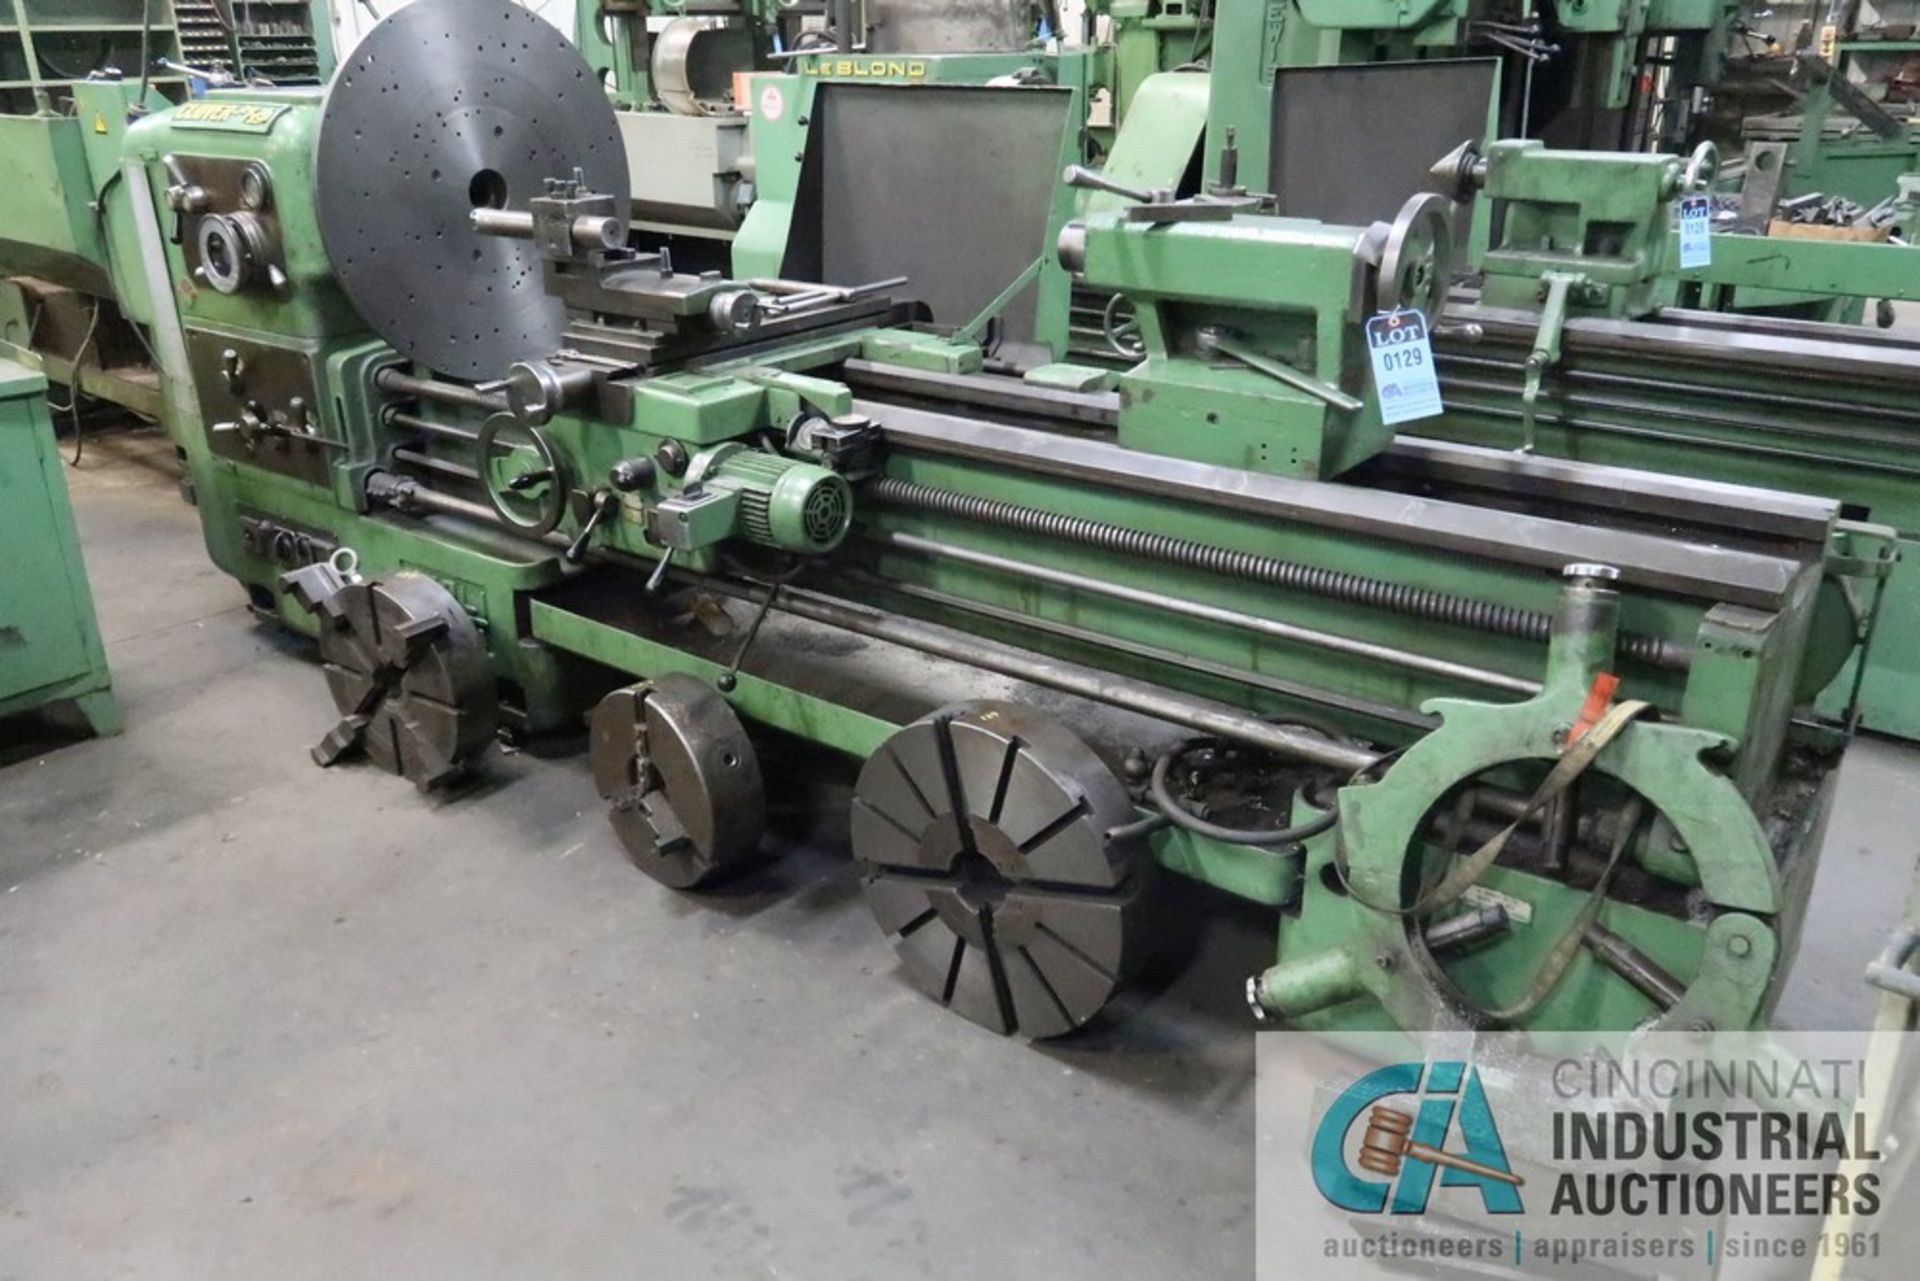 24" / 35" X 96" CLOVER GAP BED LATHE, 2-1/2" SPINDLE HOLE, 33-1/2" FACE PLATE, STEADY REST, WITH